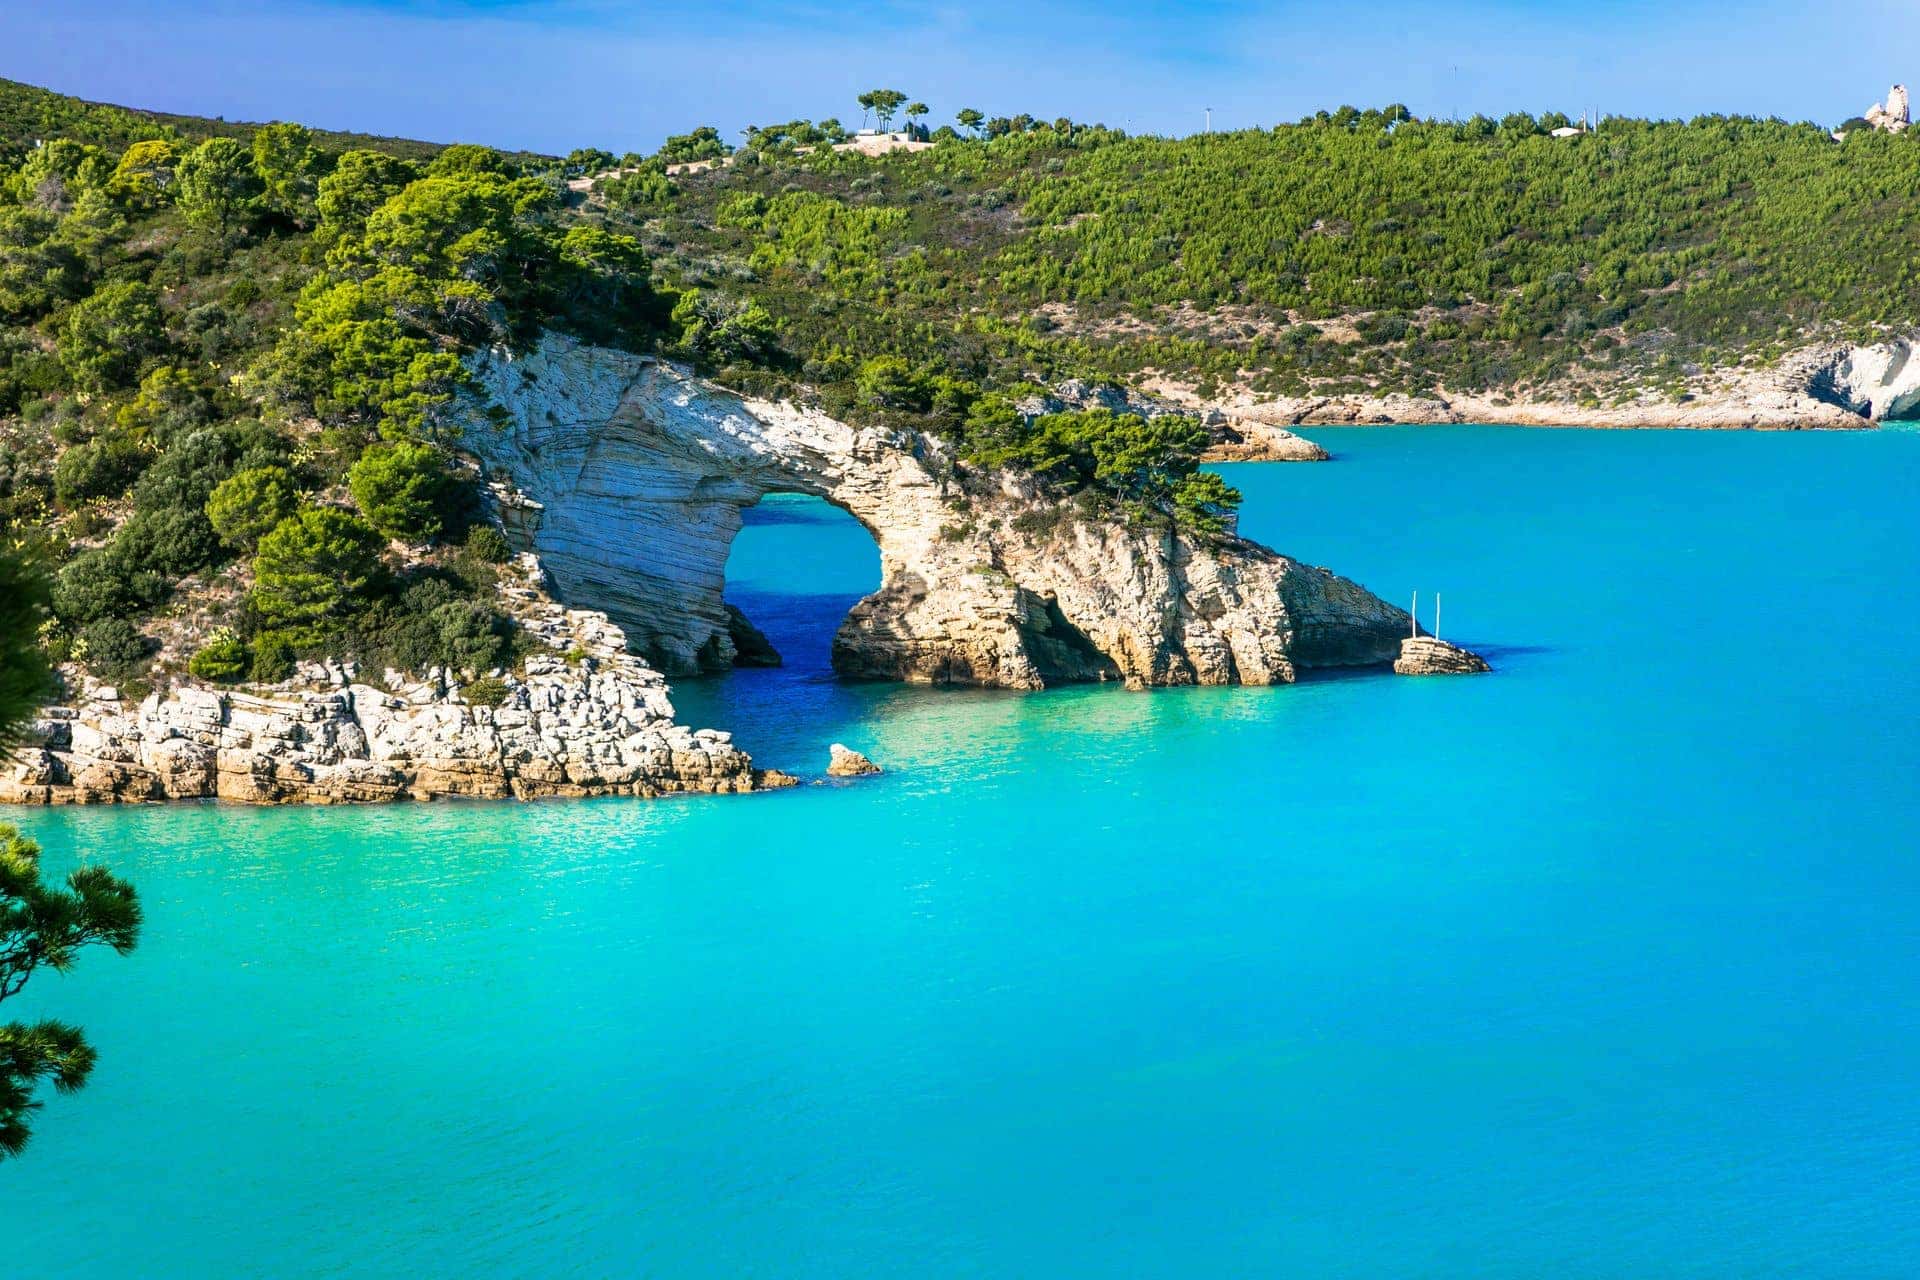 Top things to see in Puglia 2020